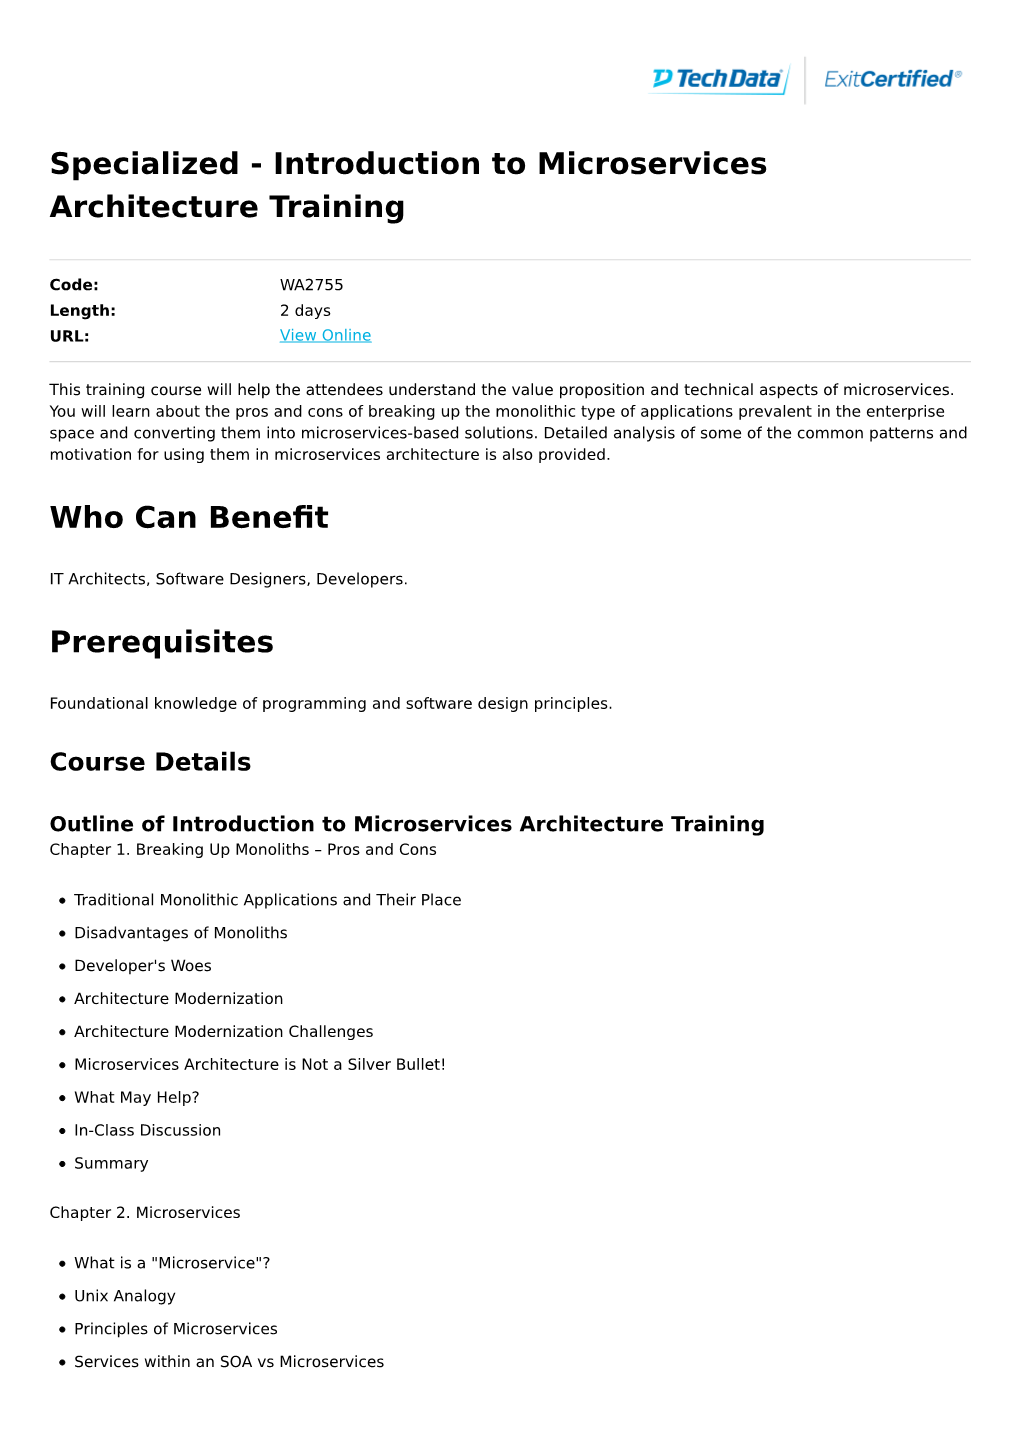 Introduction to Microservices Architecture Training